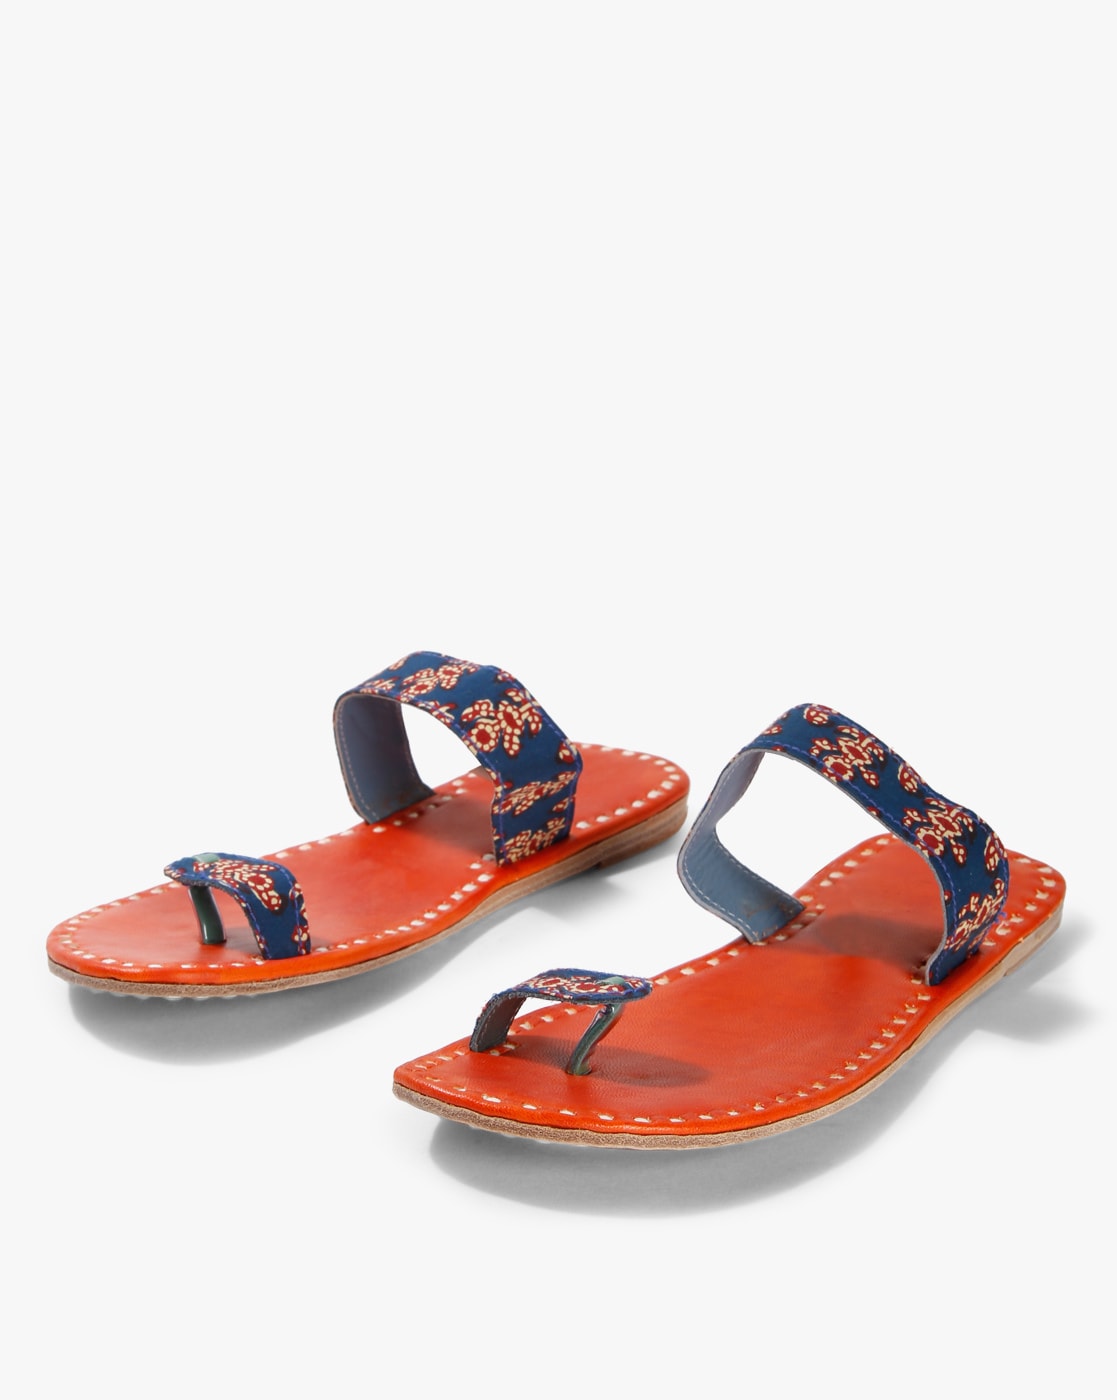 Flat Sandals for Women by Indie Picks 